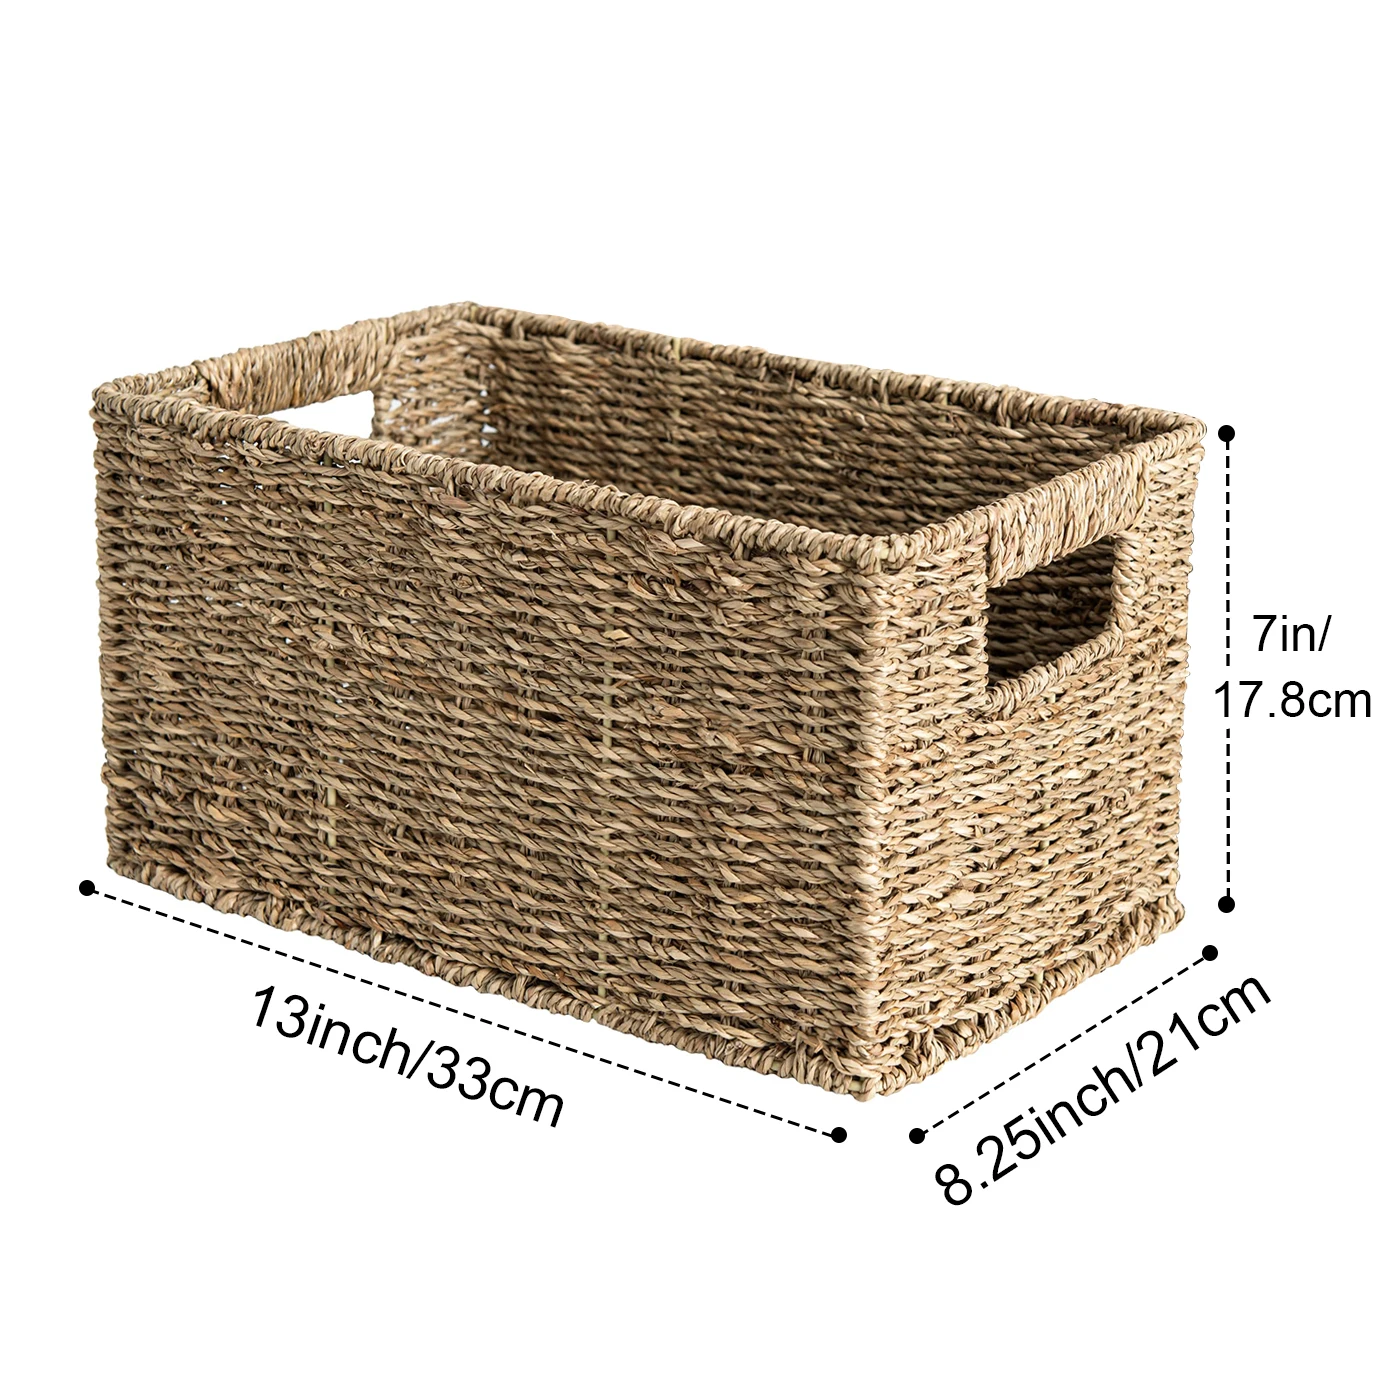 Seagrass Woven Storage Baskets Wicker Basket with Handles Storage Bins For  Organizing Bedroom Home Decor Organiser Space Saving - AliExpress